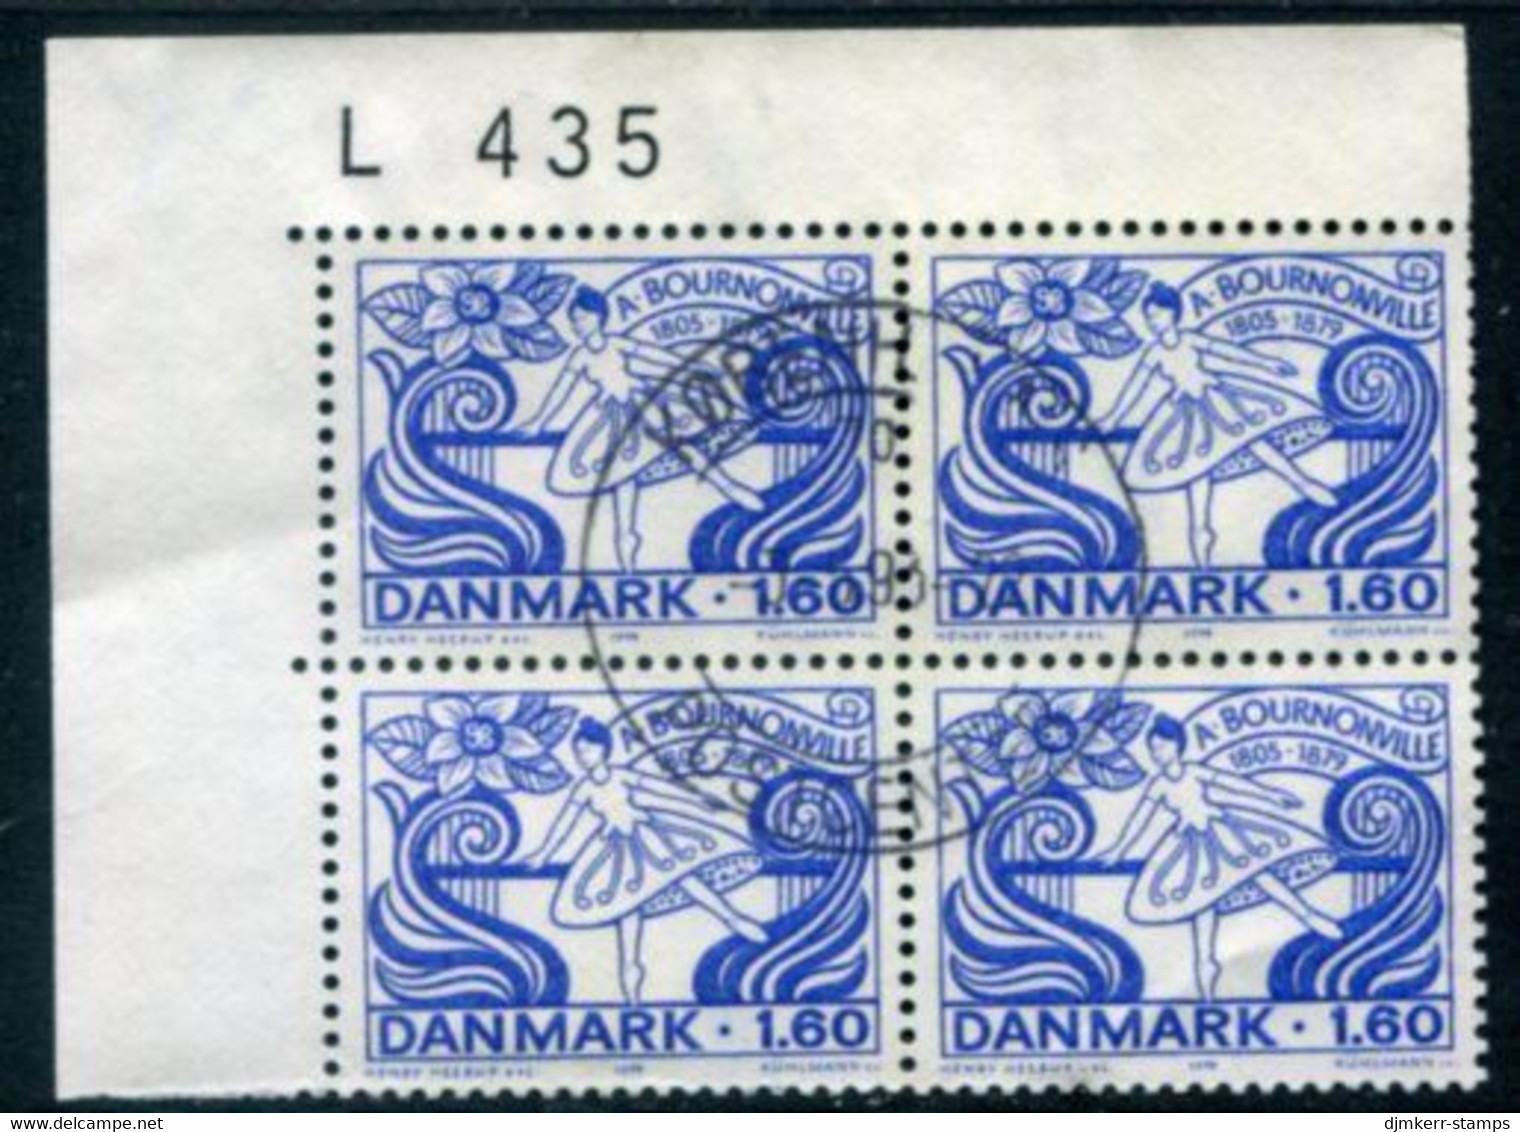 DENMARK 1979 Bournonville Death Centenary Block Of 4 Used   Michel 696 - Used Stamps